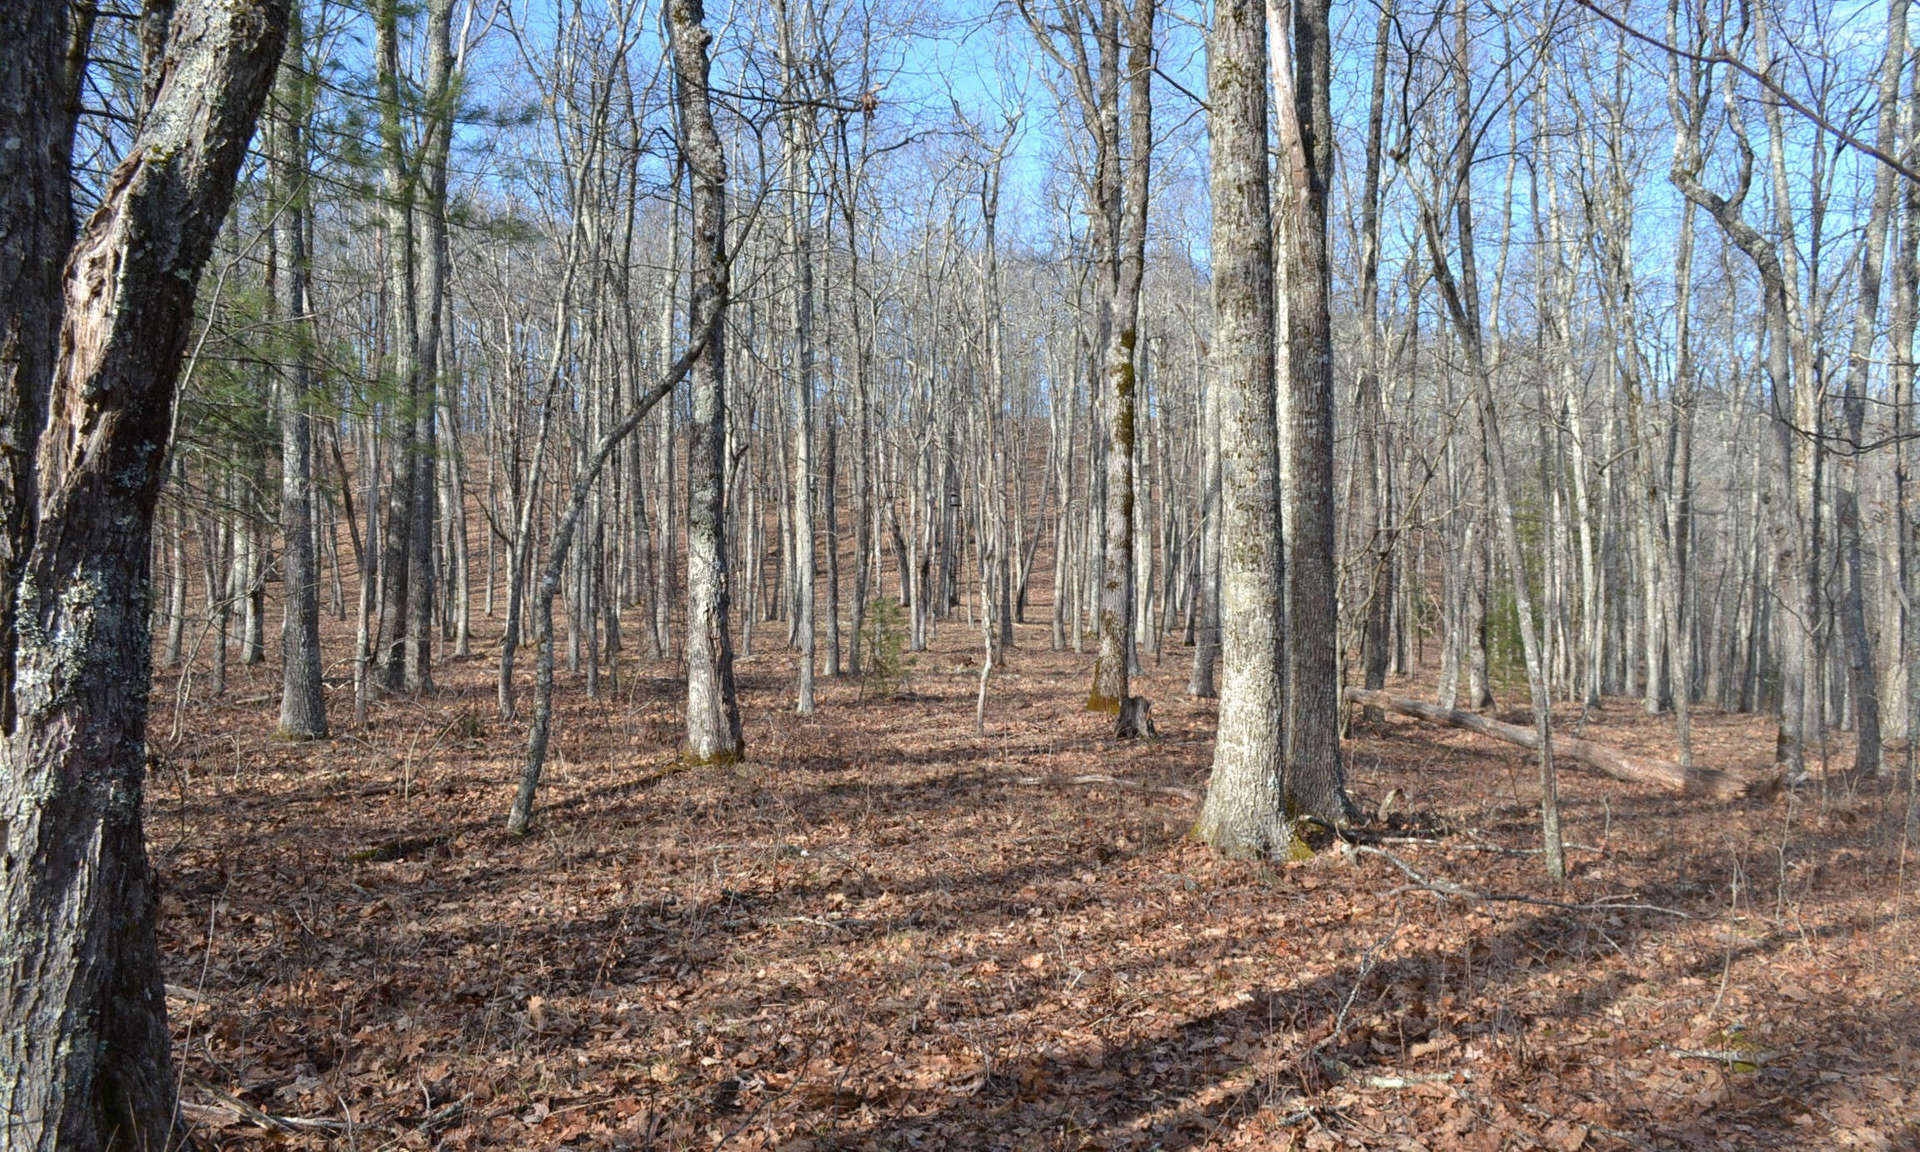 If you are looking for a private mountain retreat or a hunter's retreat, then take a look at this gorgeous 12 acre tract bordered by Jefferson National Forest on three sides and long state maintained road frontage. Spectacular seasonal views, High elevation, abundant wildlife, modest cabin, and hundreds of acres to hike or hunt.